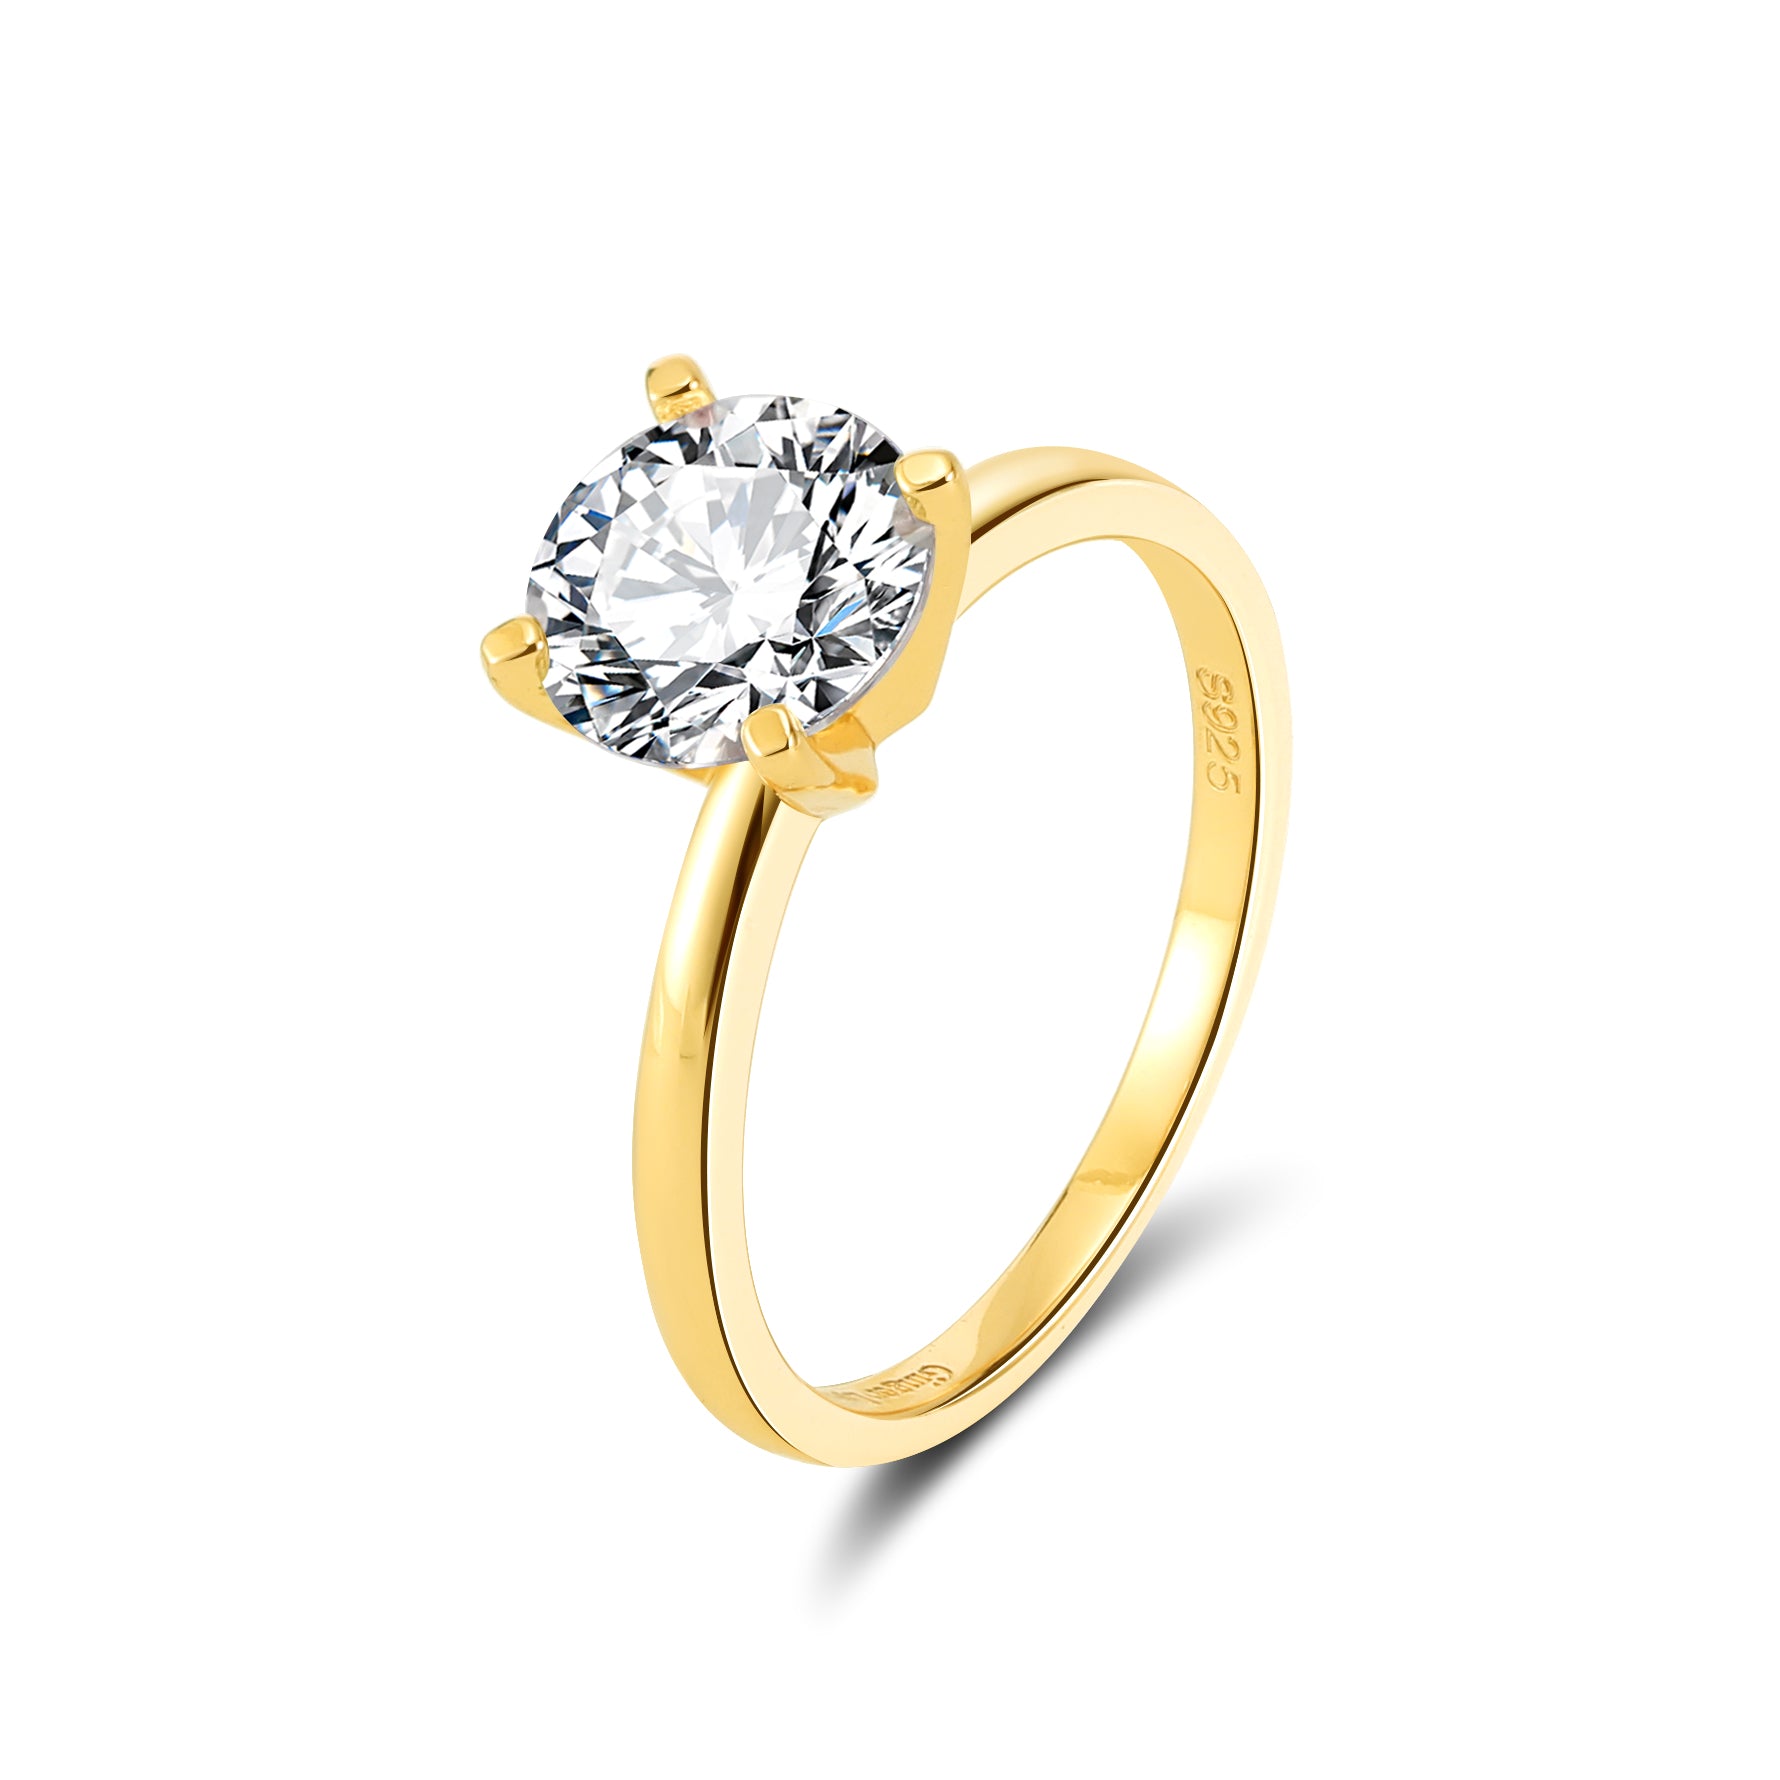 Amore Engagement Ring Women Gold Sterling Silver 1Ct Topaz Ginger Lyne Collection - Gold 1Carat,8